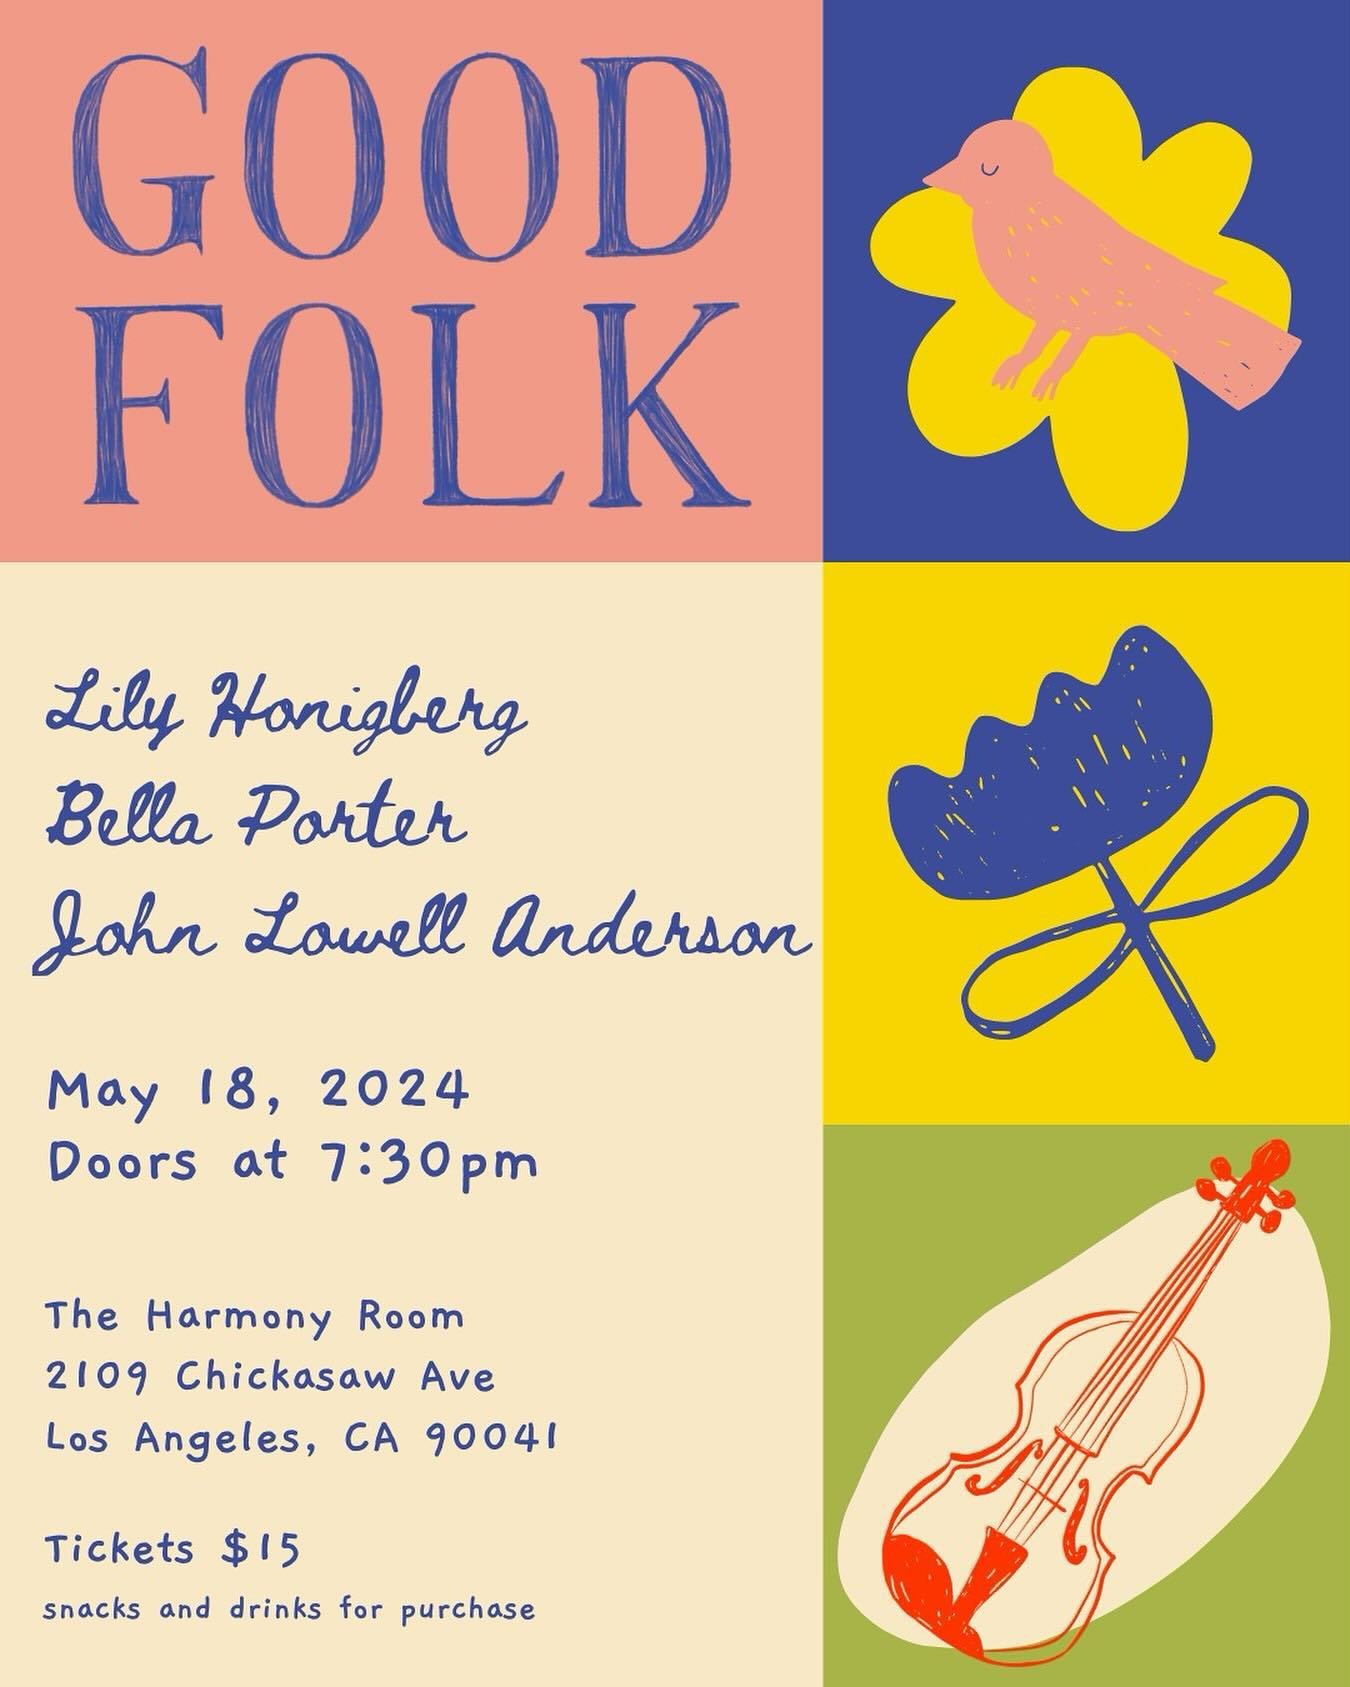 TOMORROW!!! @lilybelknap @johnlowellanderson and @bellaporter at the @harmonyroomla at 7:30pm!! There&rsquo;s still time to get your ticket, check out the link in our bio. Can&rsquo;t wait to see you there 🌻
.
.
.
.
.
#folkmusic #goodfolk #losangele